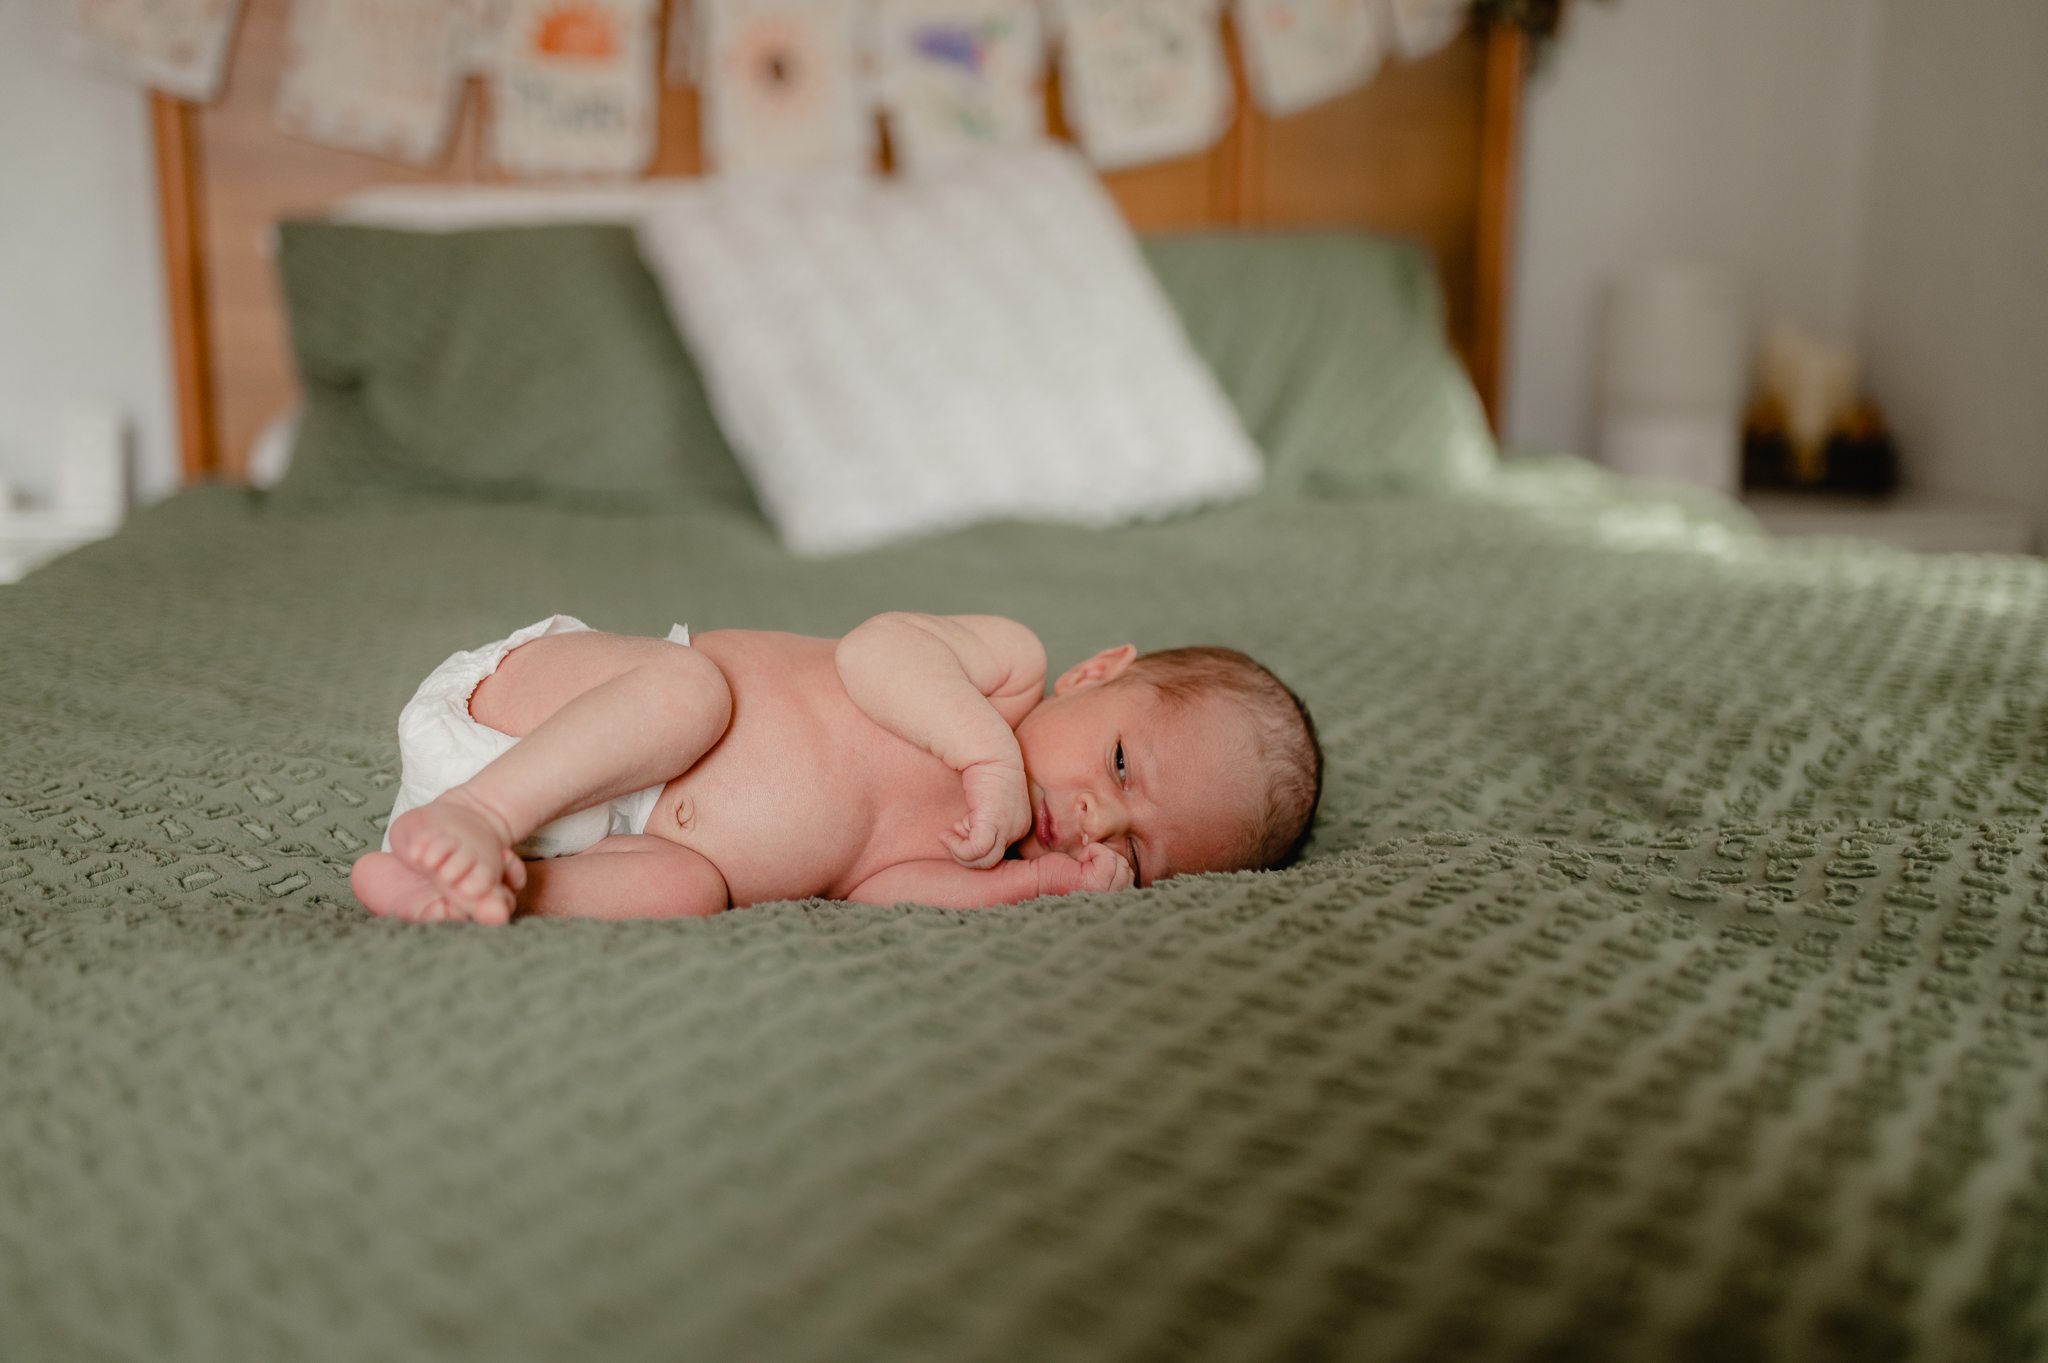 baby boy snuggling naked with only a diaper on the master bed covered with a green bedspread